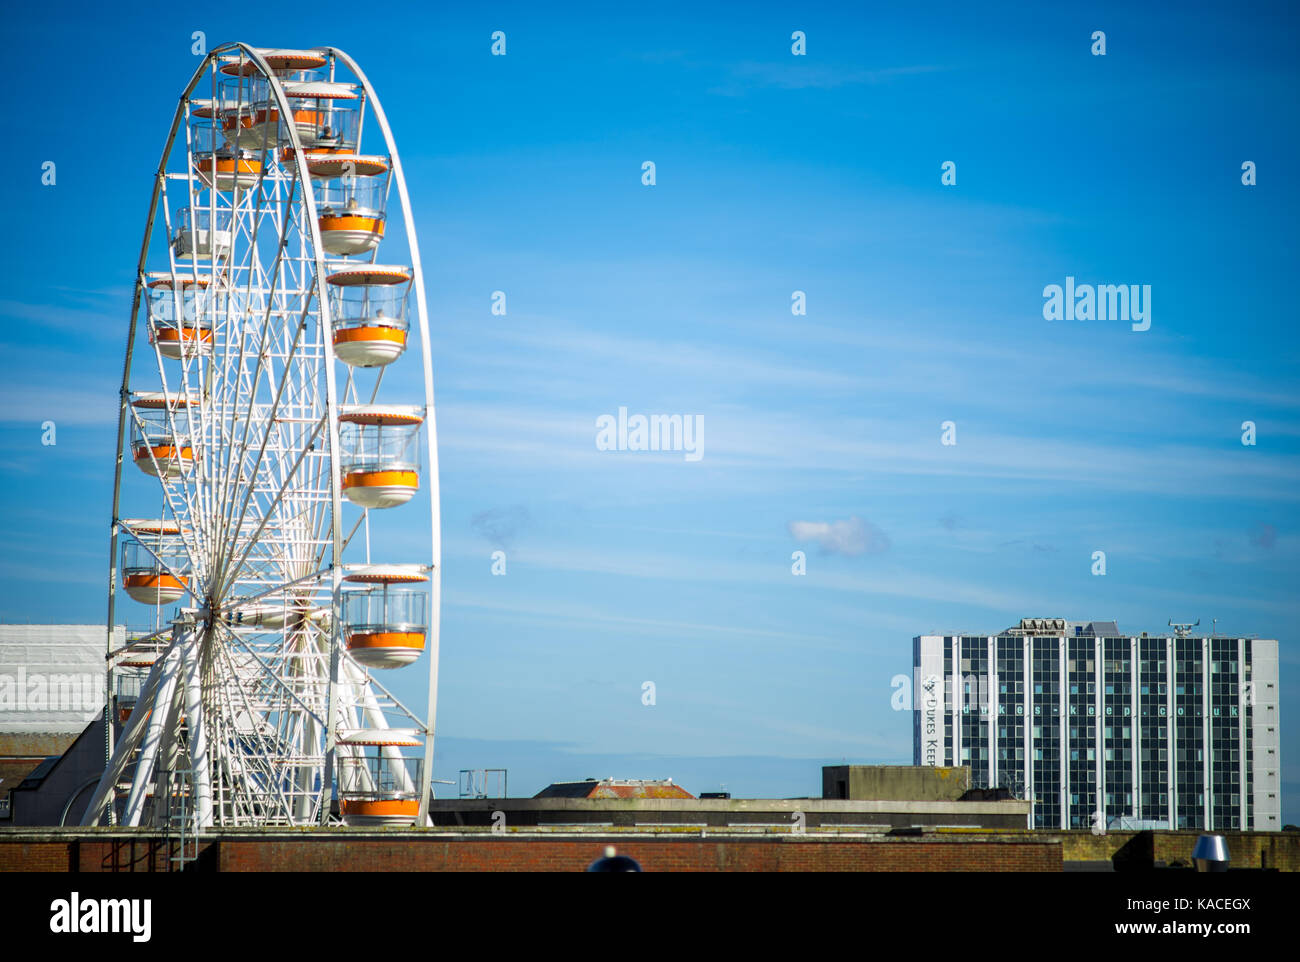 The Sky View Observation Wheel - the Uk's tallest mobile ferris wheel erected in Southampton city centre, UK Stock Photo